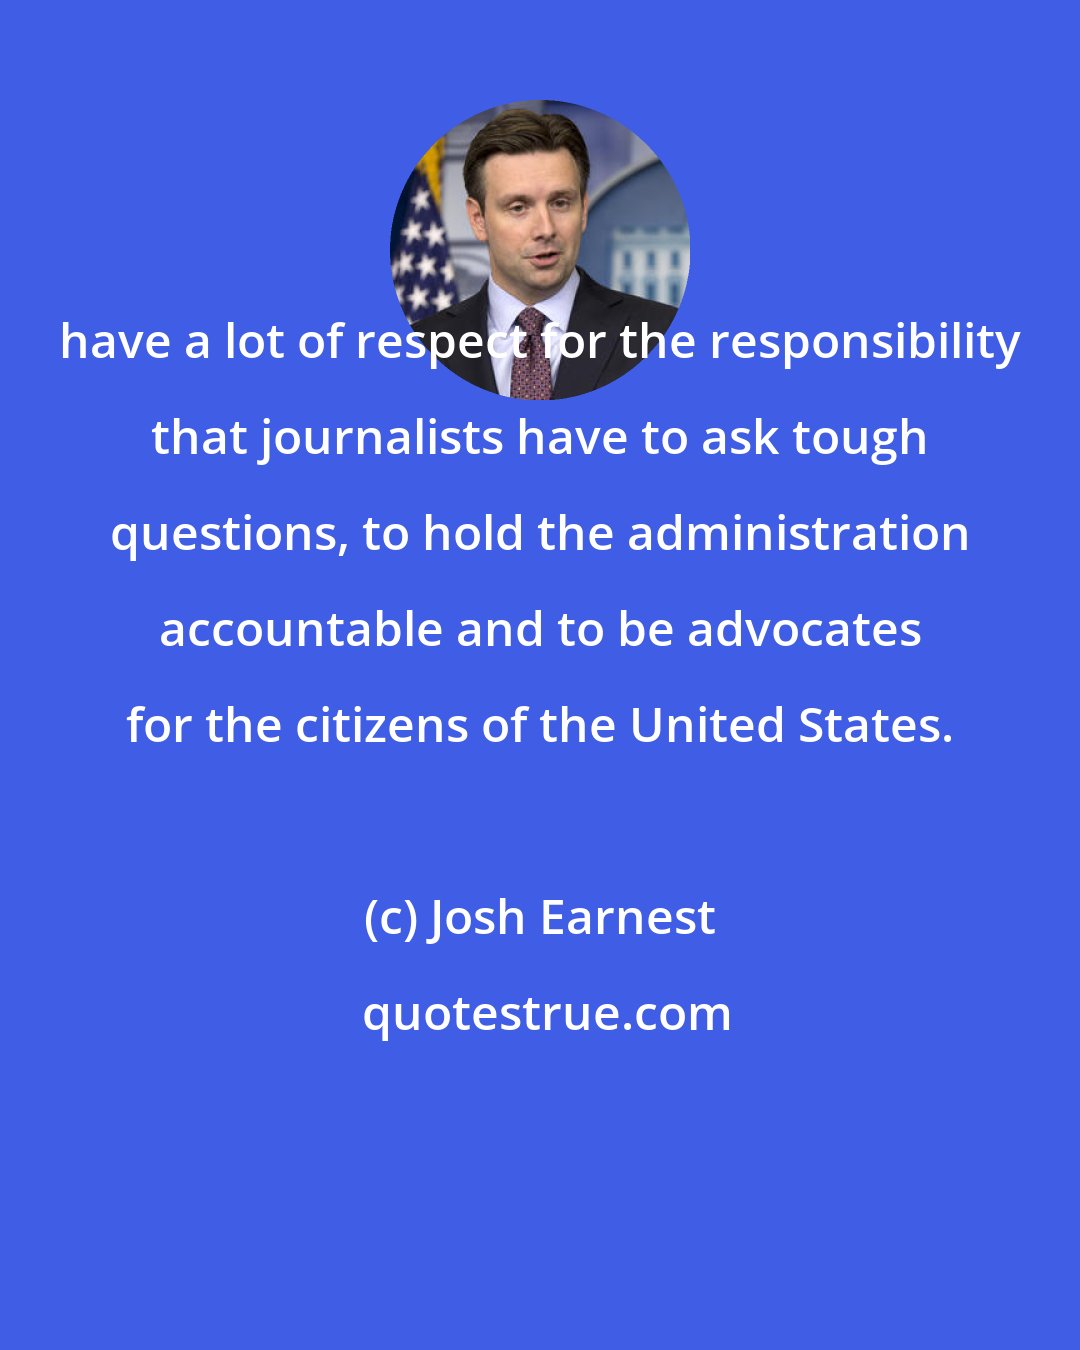 Josh Earnest: have a lot of respect for the responsibility that journalists have to ask tough questions, to hold the administration accountable and to be advocates for the citizens of the United States.